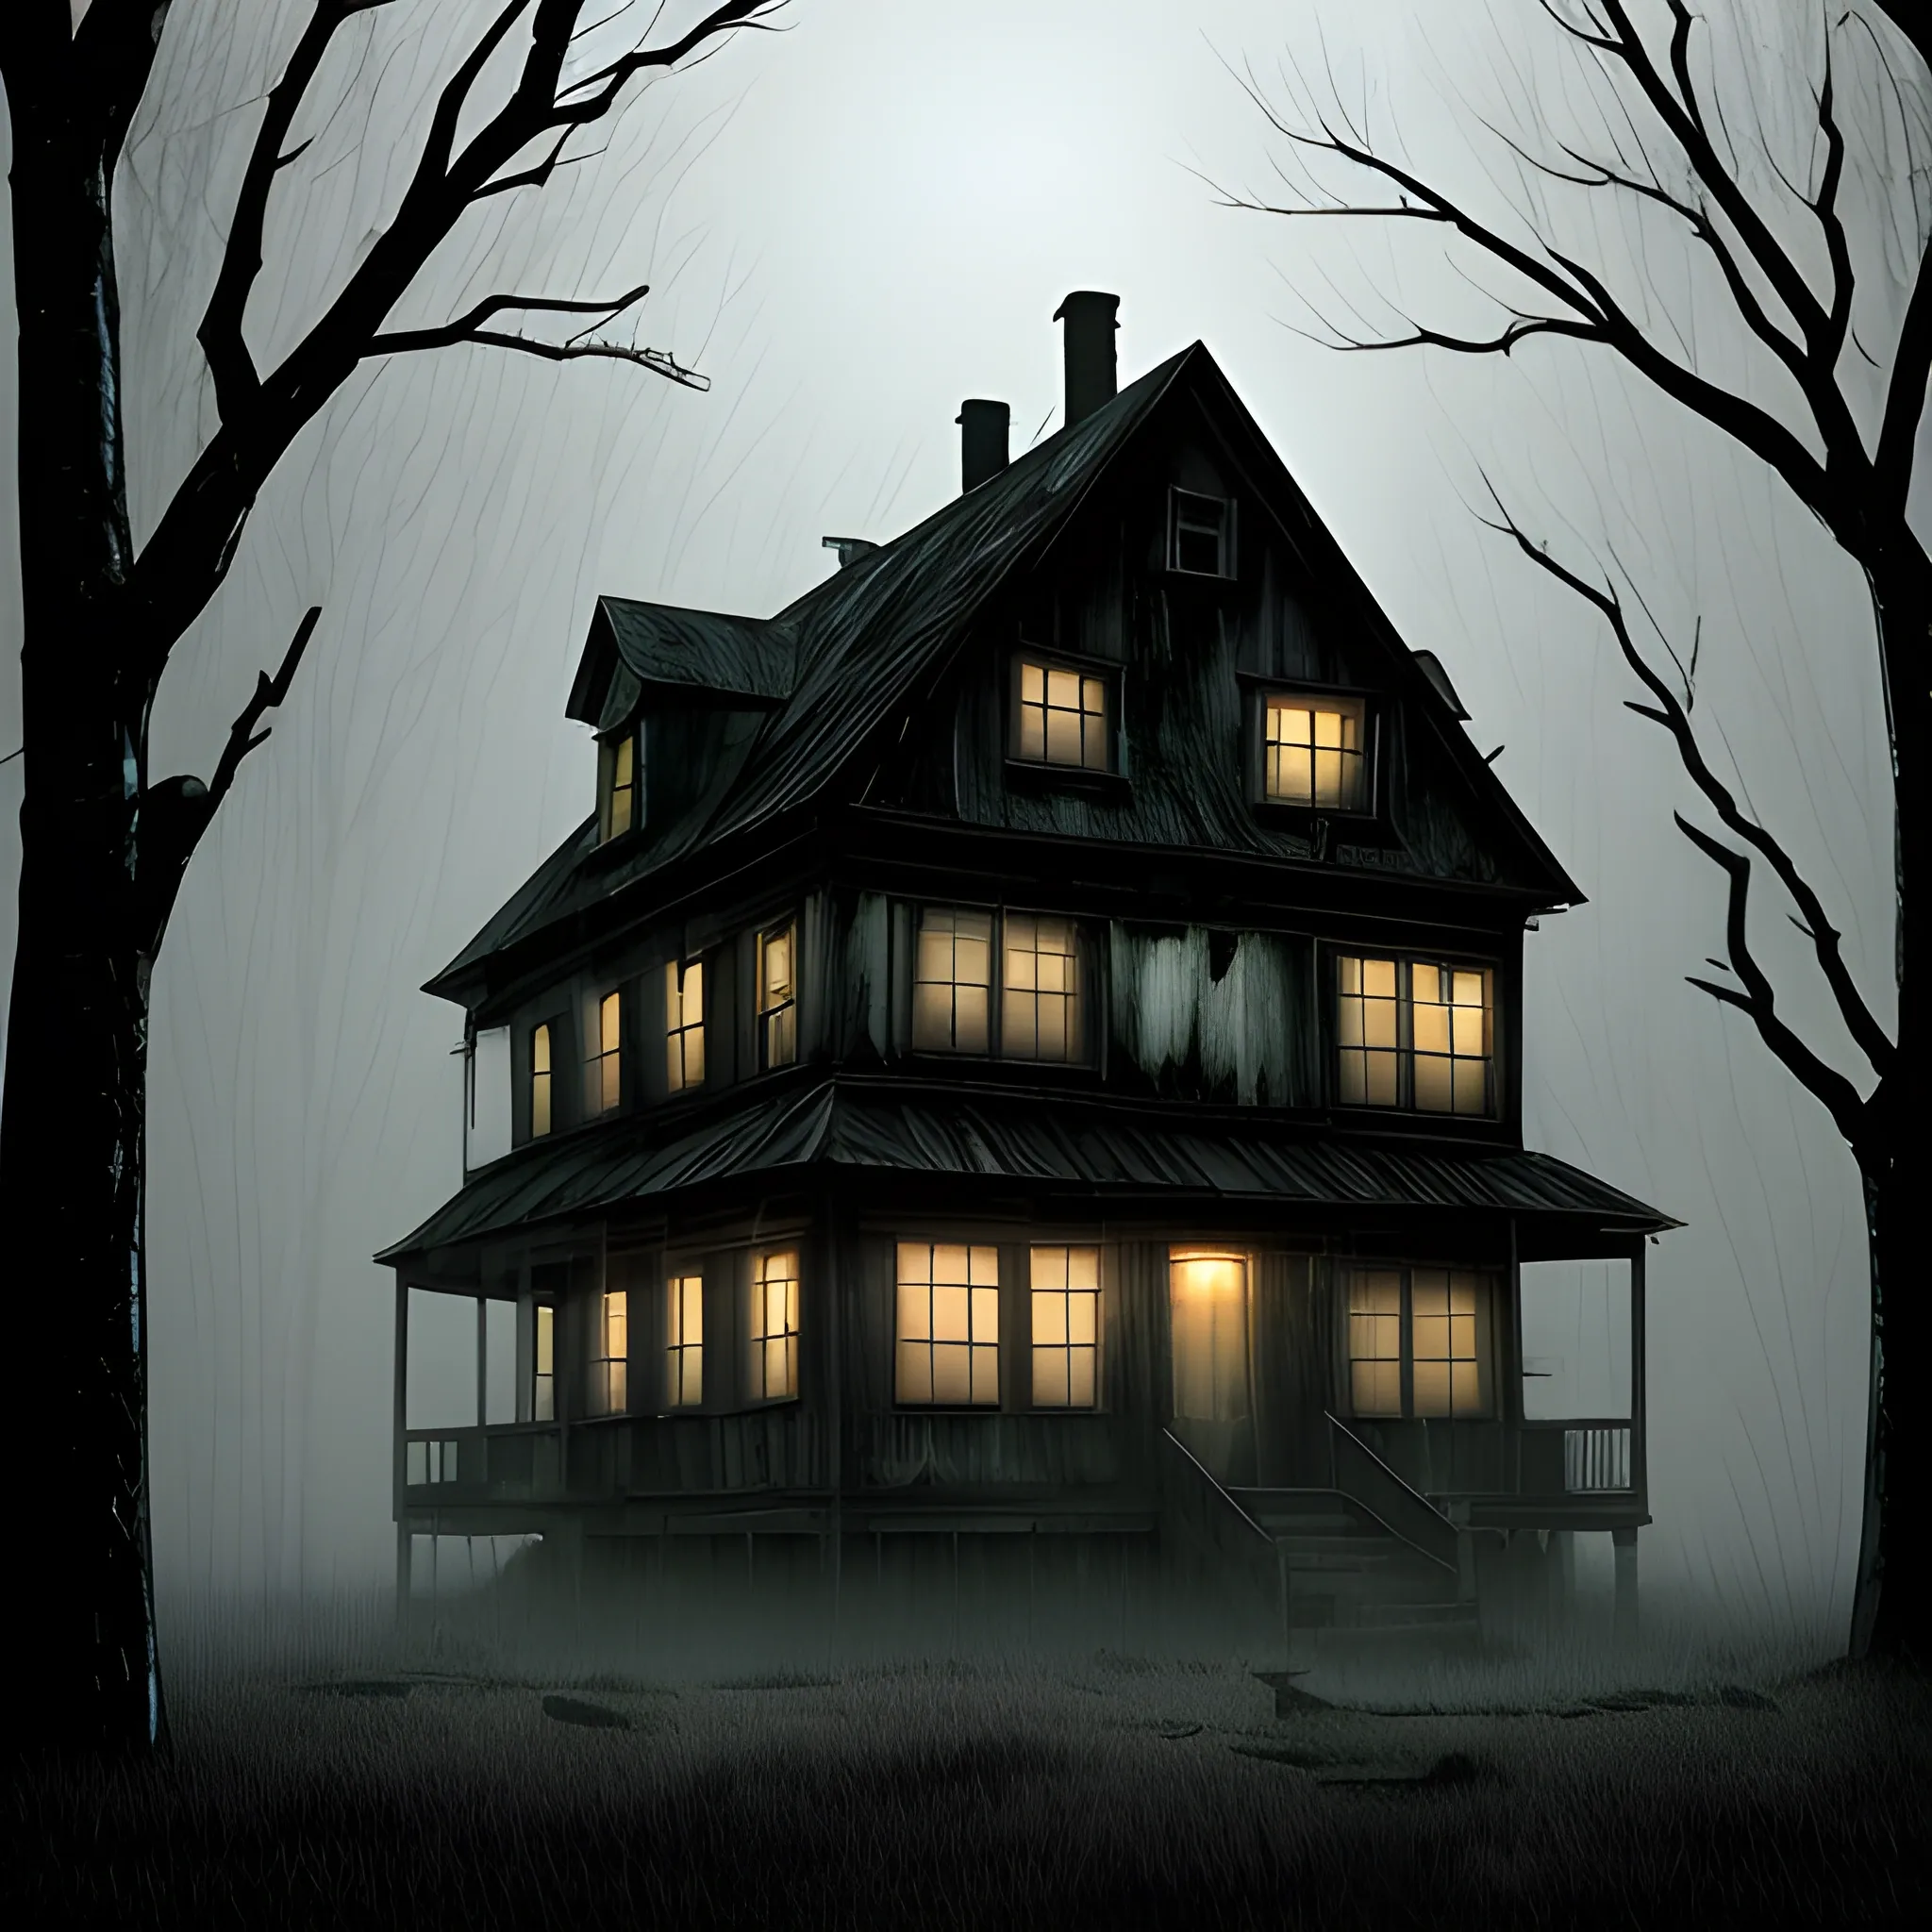 "An old, dilapidated house on a cold and rainy night, with a dark, ominous aura."
"A haunted house at the outskirts of town, surrounded by fog and tall, dead trees."
ugly, 





